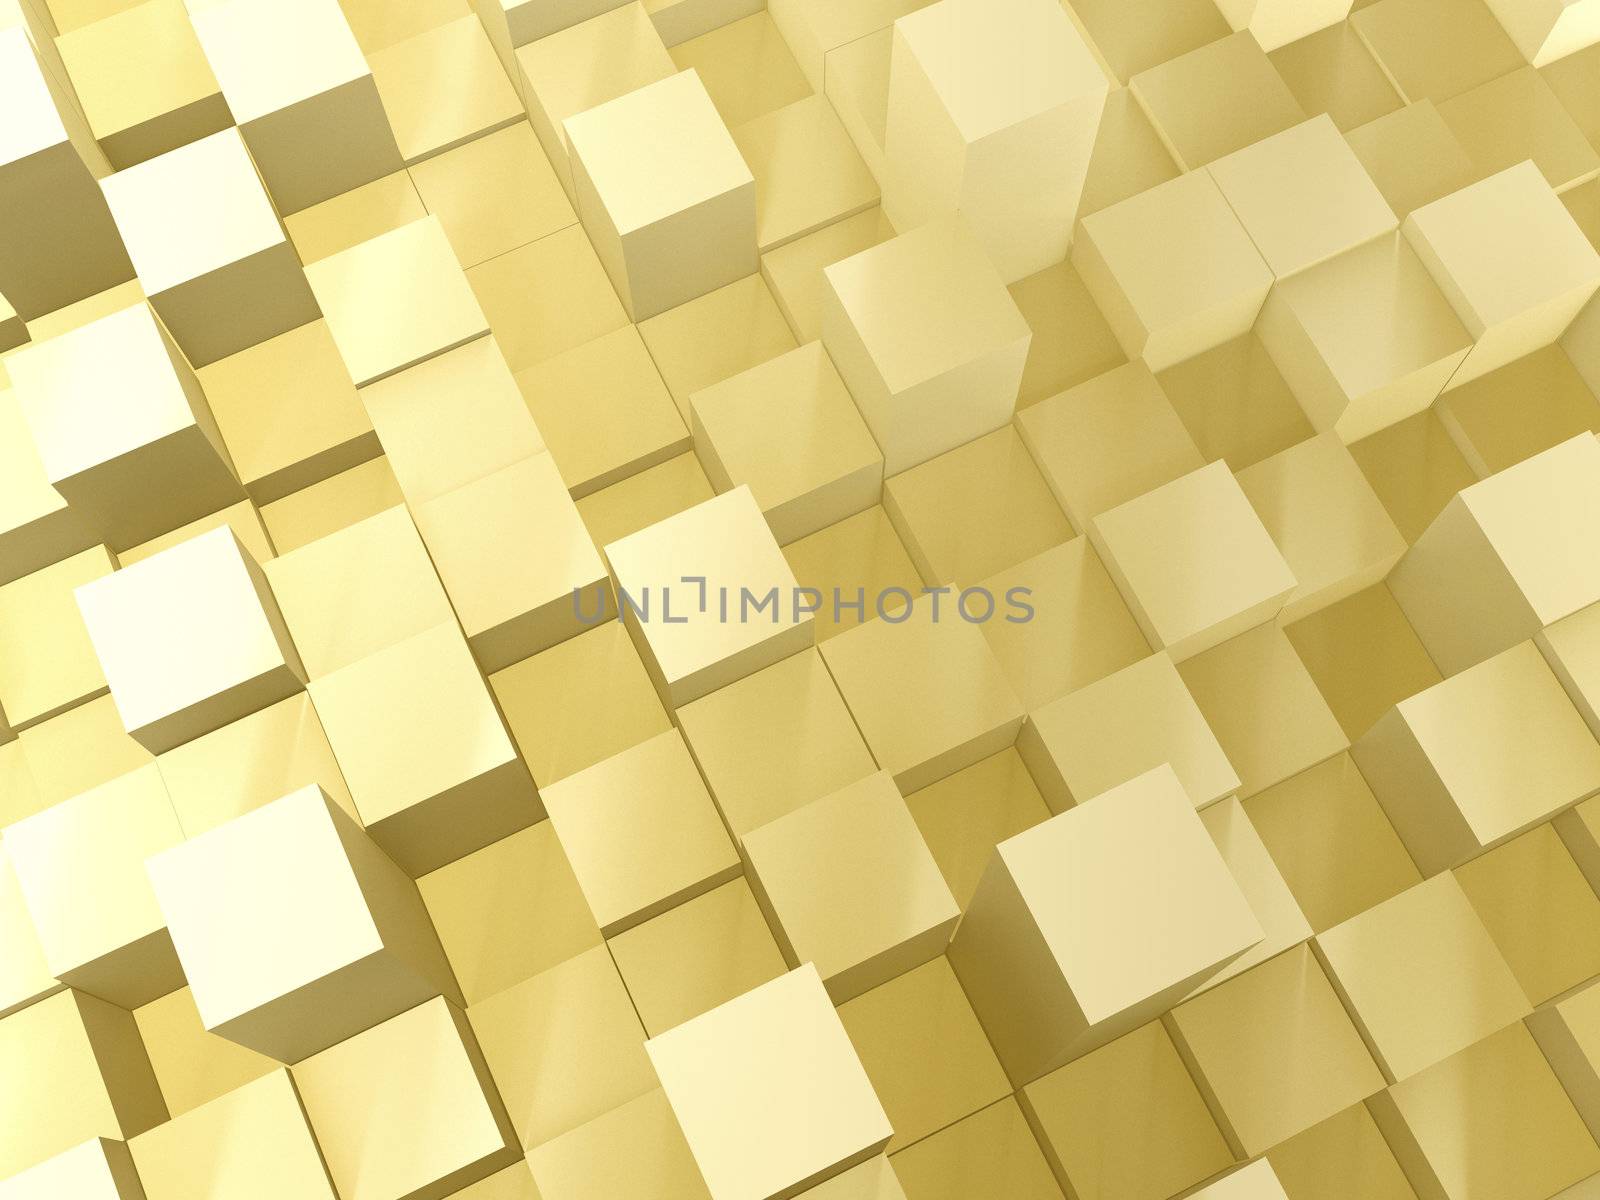 Golden bars by magraphics